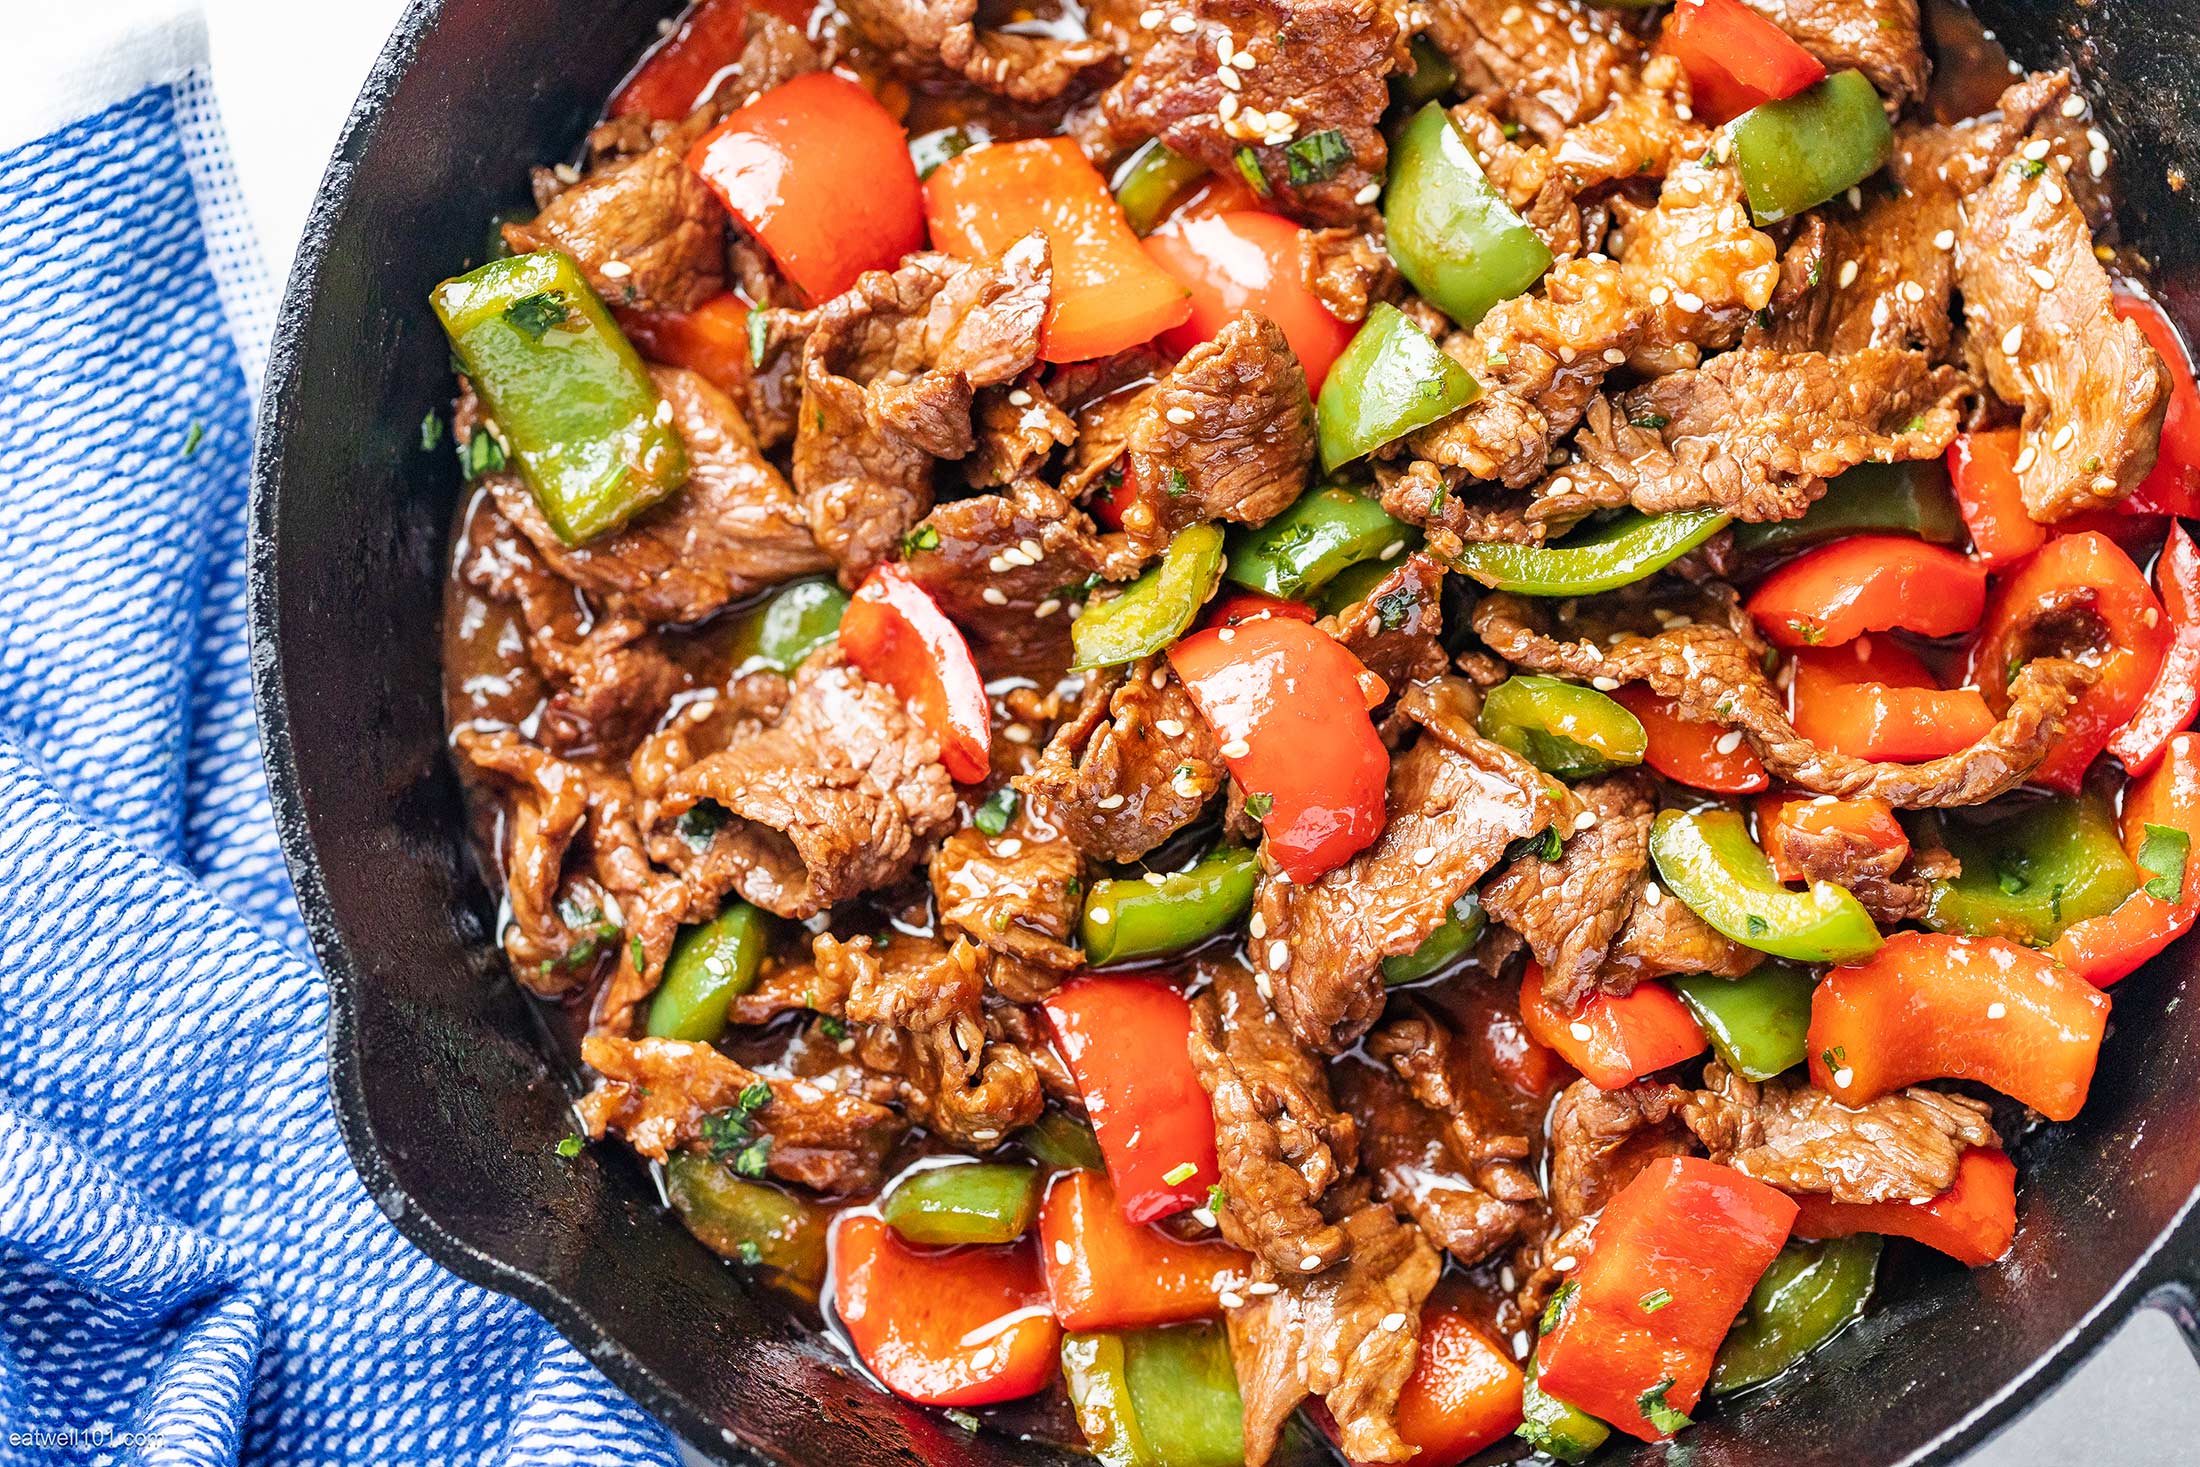 25 Flavorful Stir-Fry Recipes That Are Way Better Than Take-Out